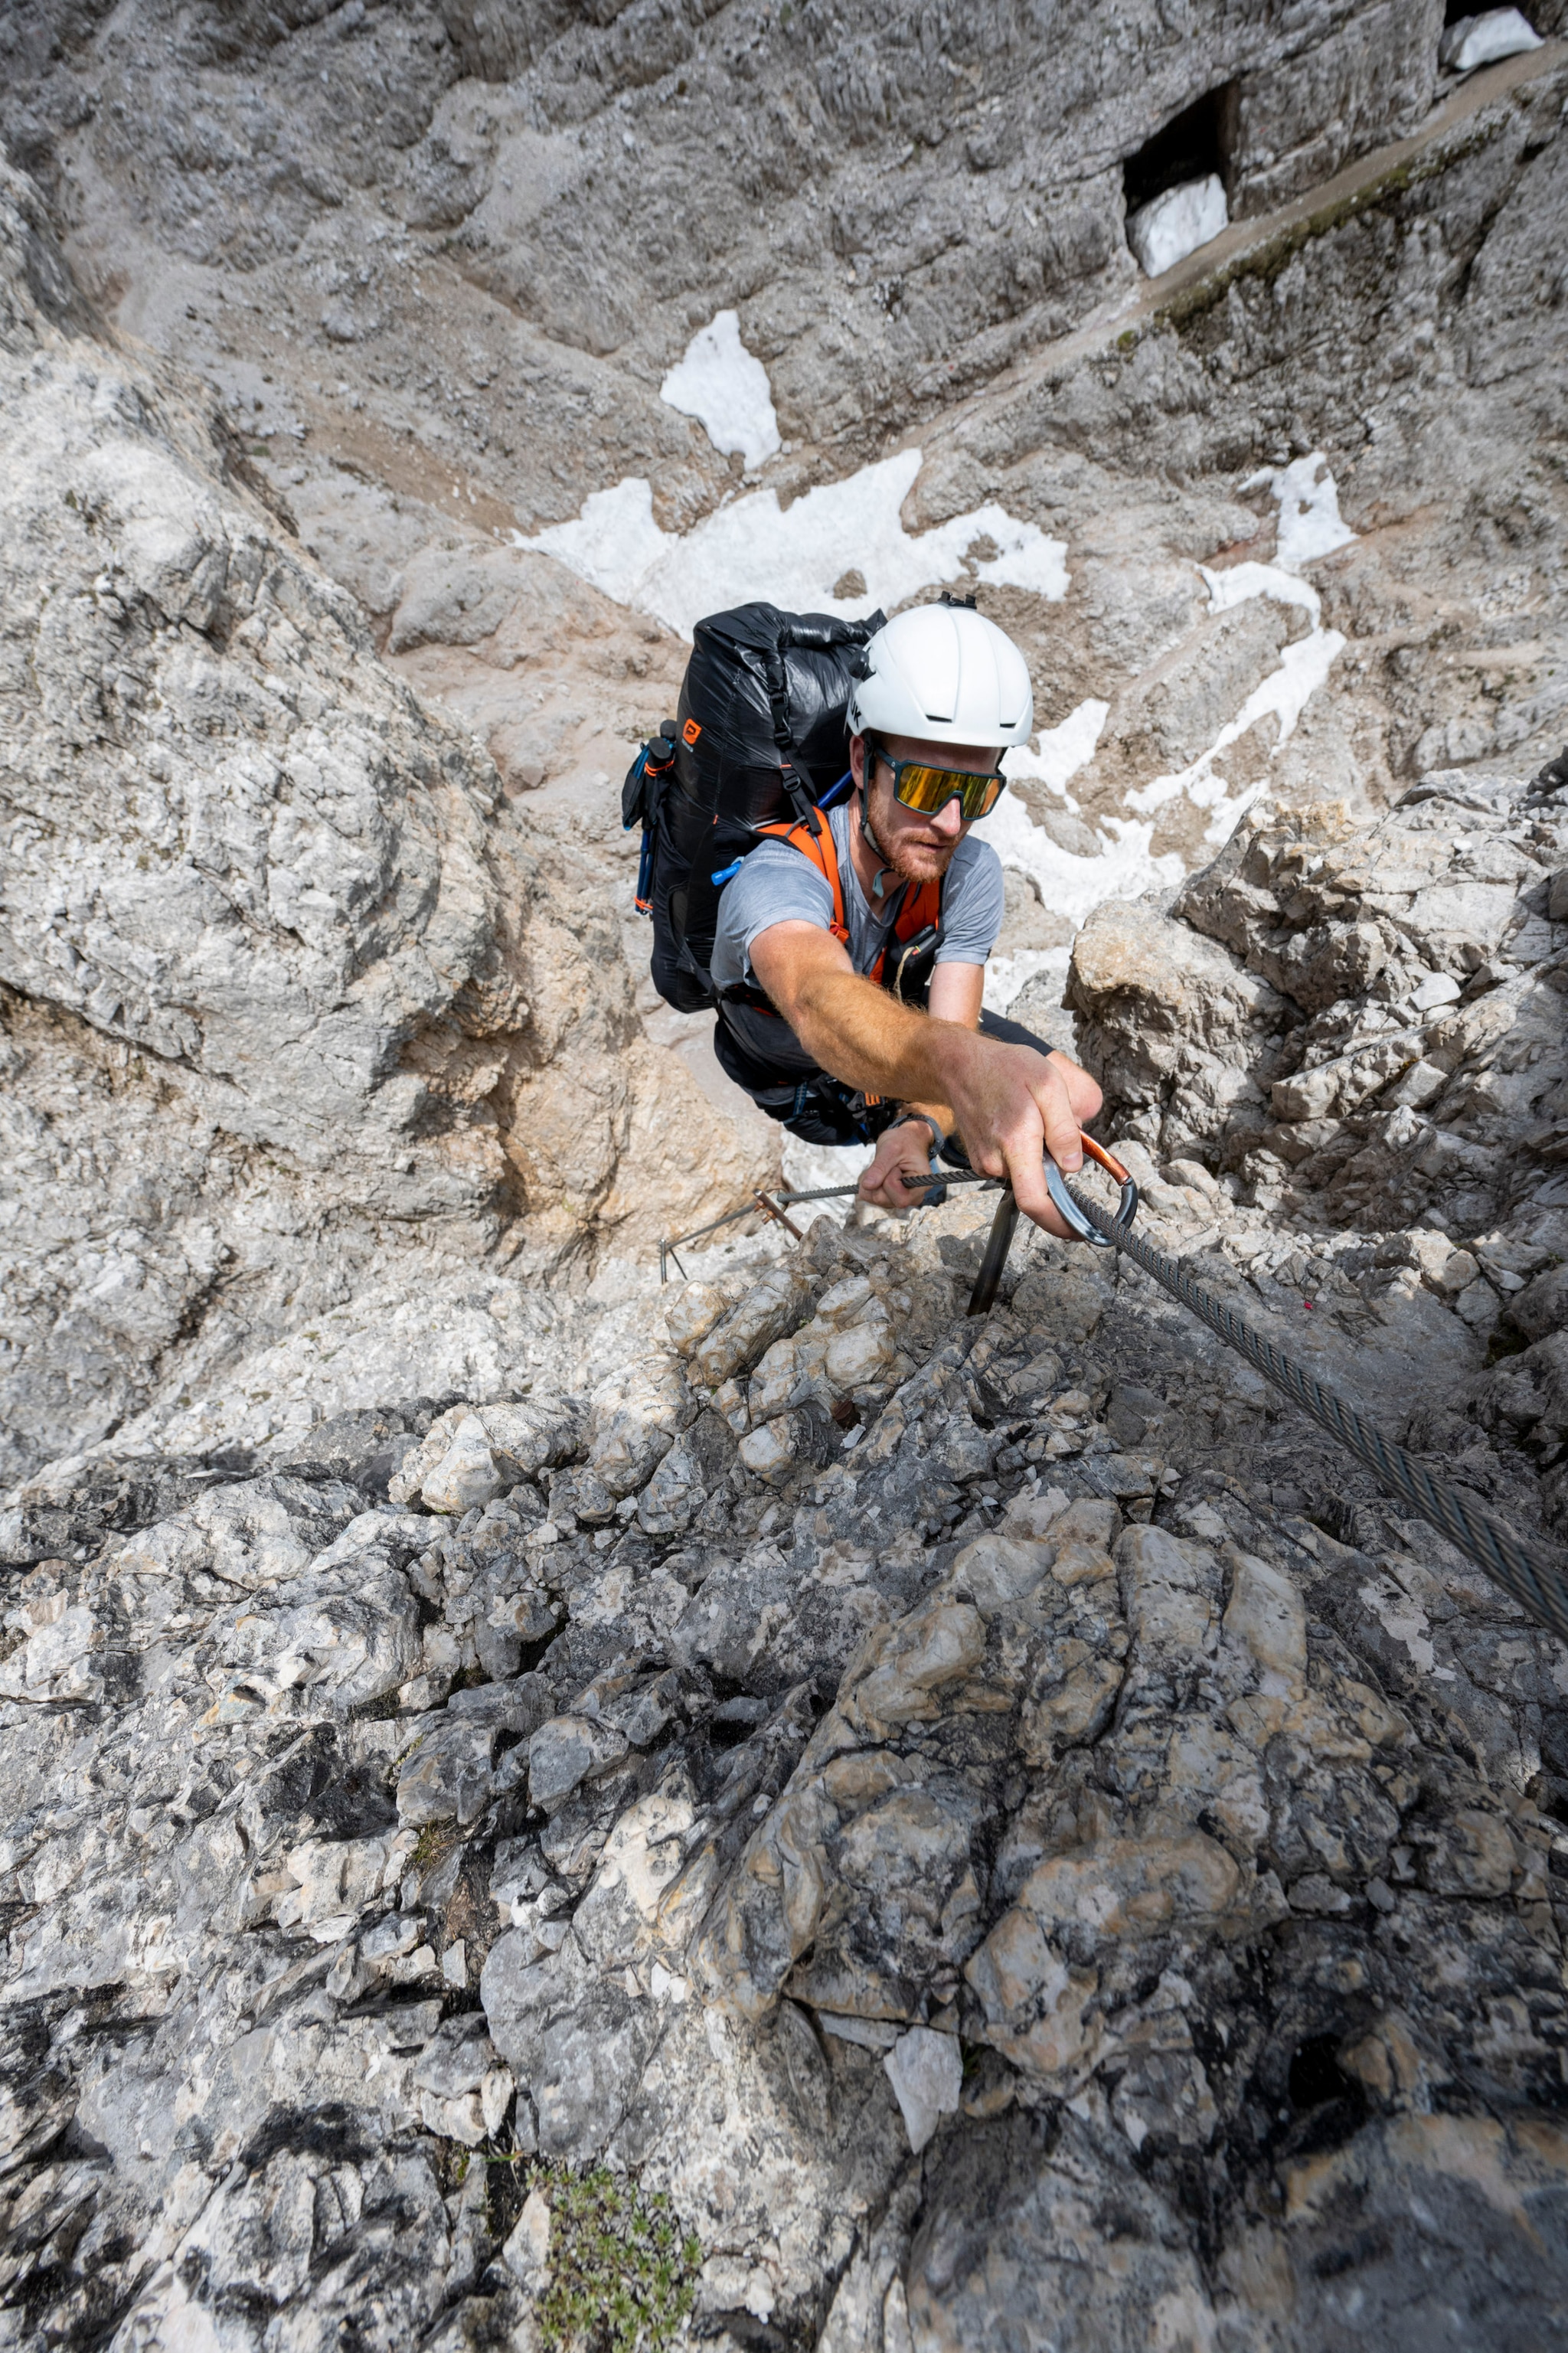 Logan Walters climbs during Red Bull X-Alps in Italy on June 20, 2023.